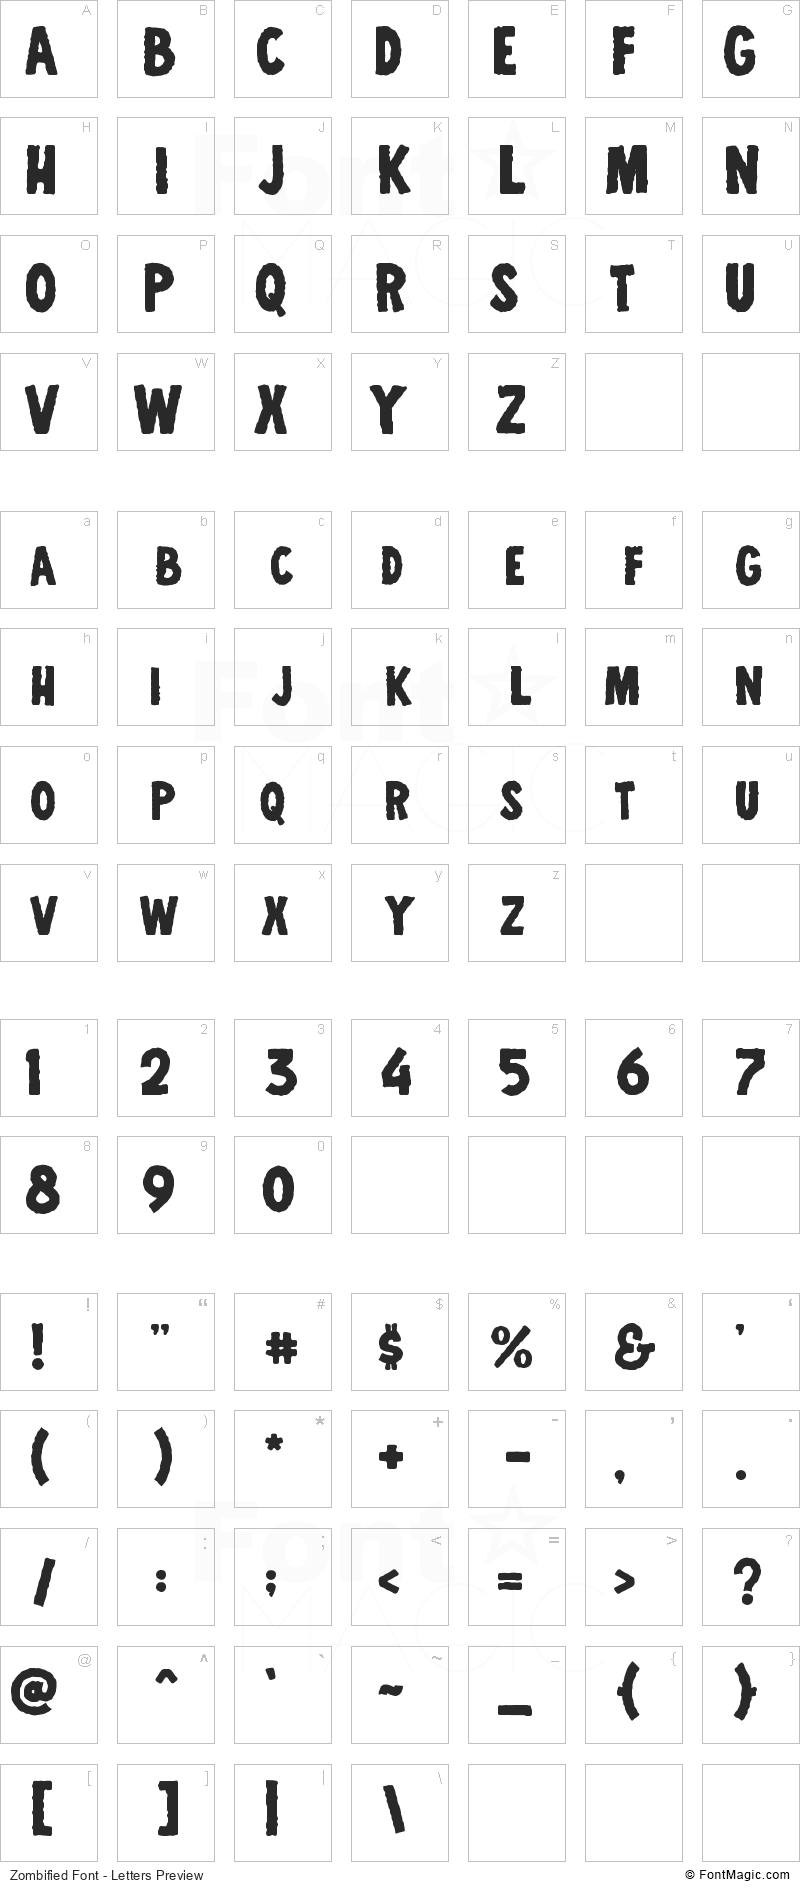 Zombified Font - All Latters Preview Chart